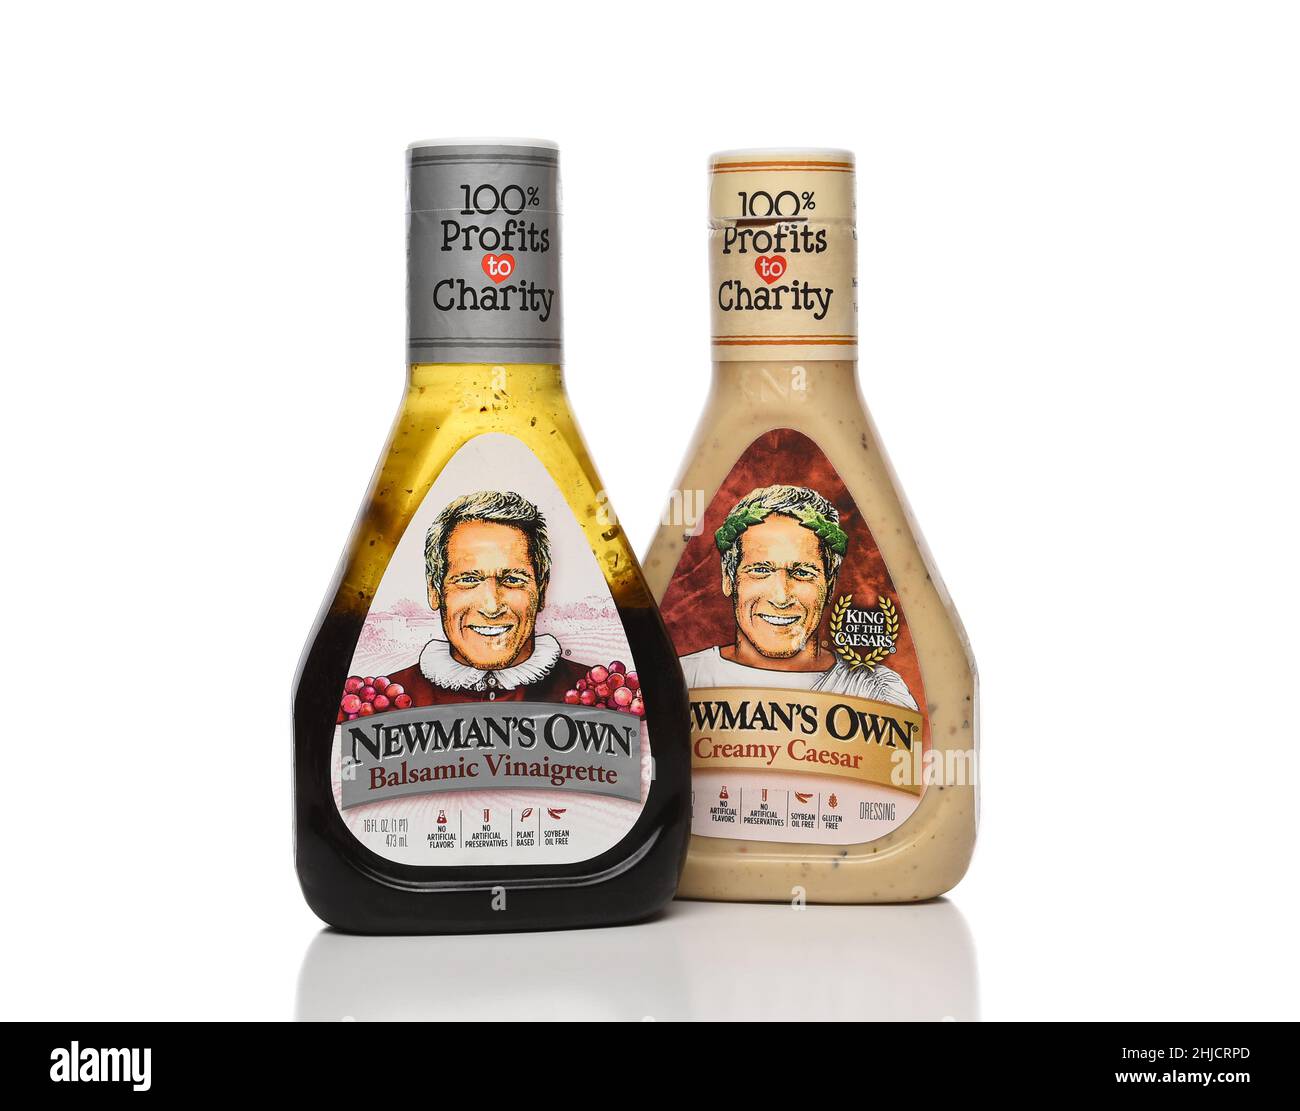 IRVINE, CALIFORNIA - 27 JAN 2022: Two bottles of Newmans Own Salad Dressing, Balsamic Vinegar and Creamy Ceasar. Stock Photo